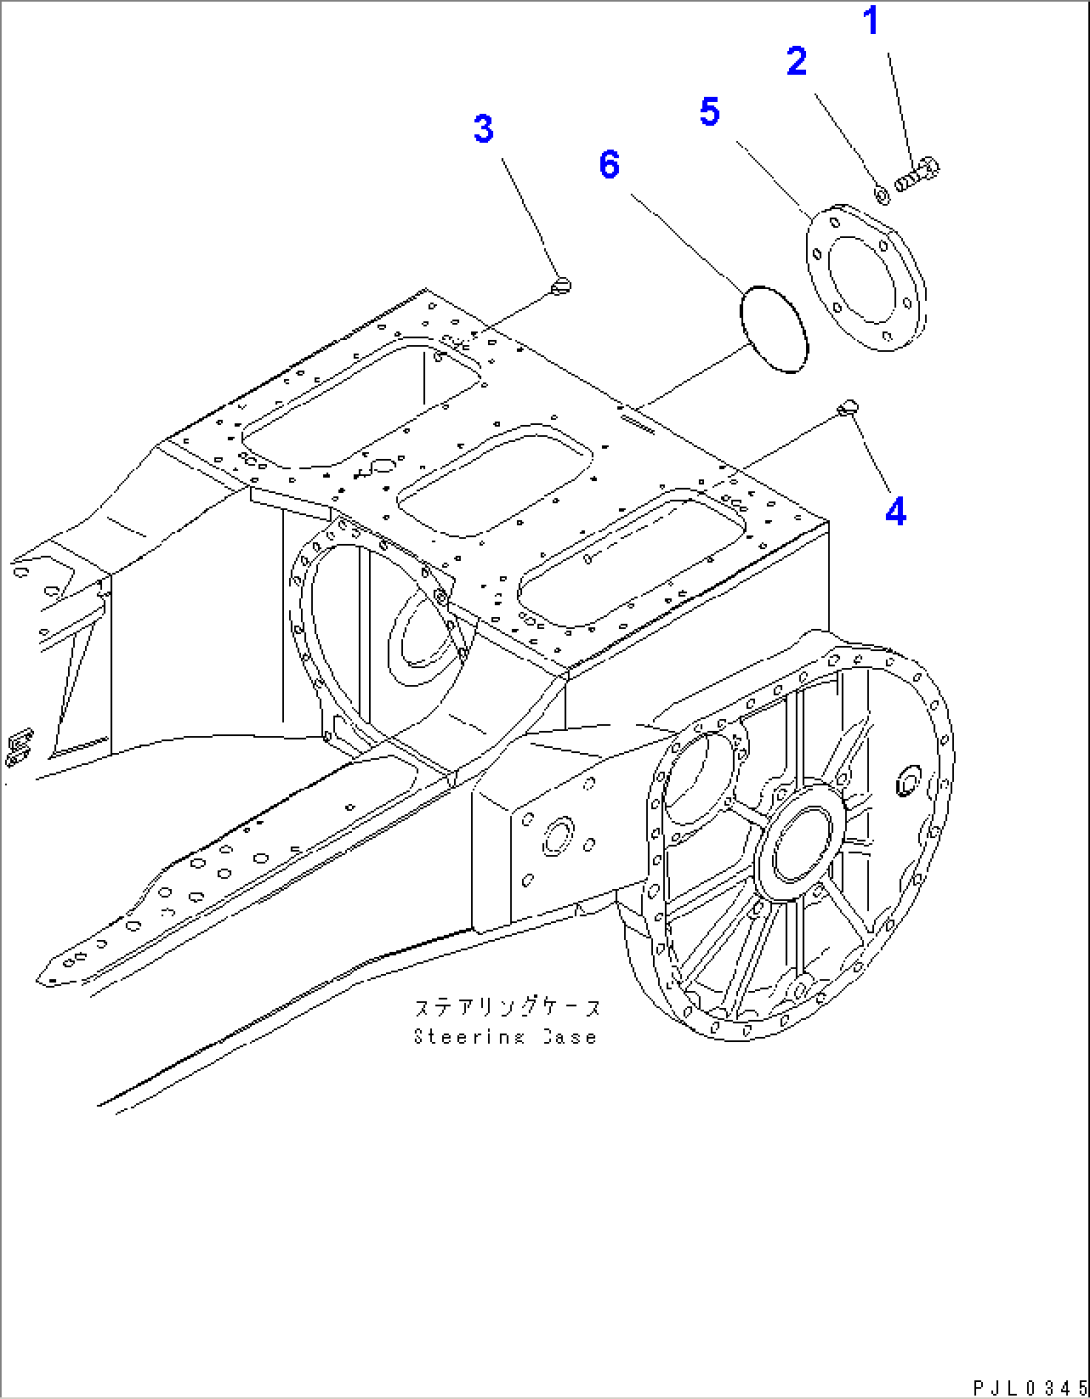 STEERING CASE REAR COVER (COLD WEATHER (A) SPEC.)(#14413-)